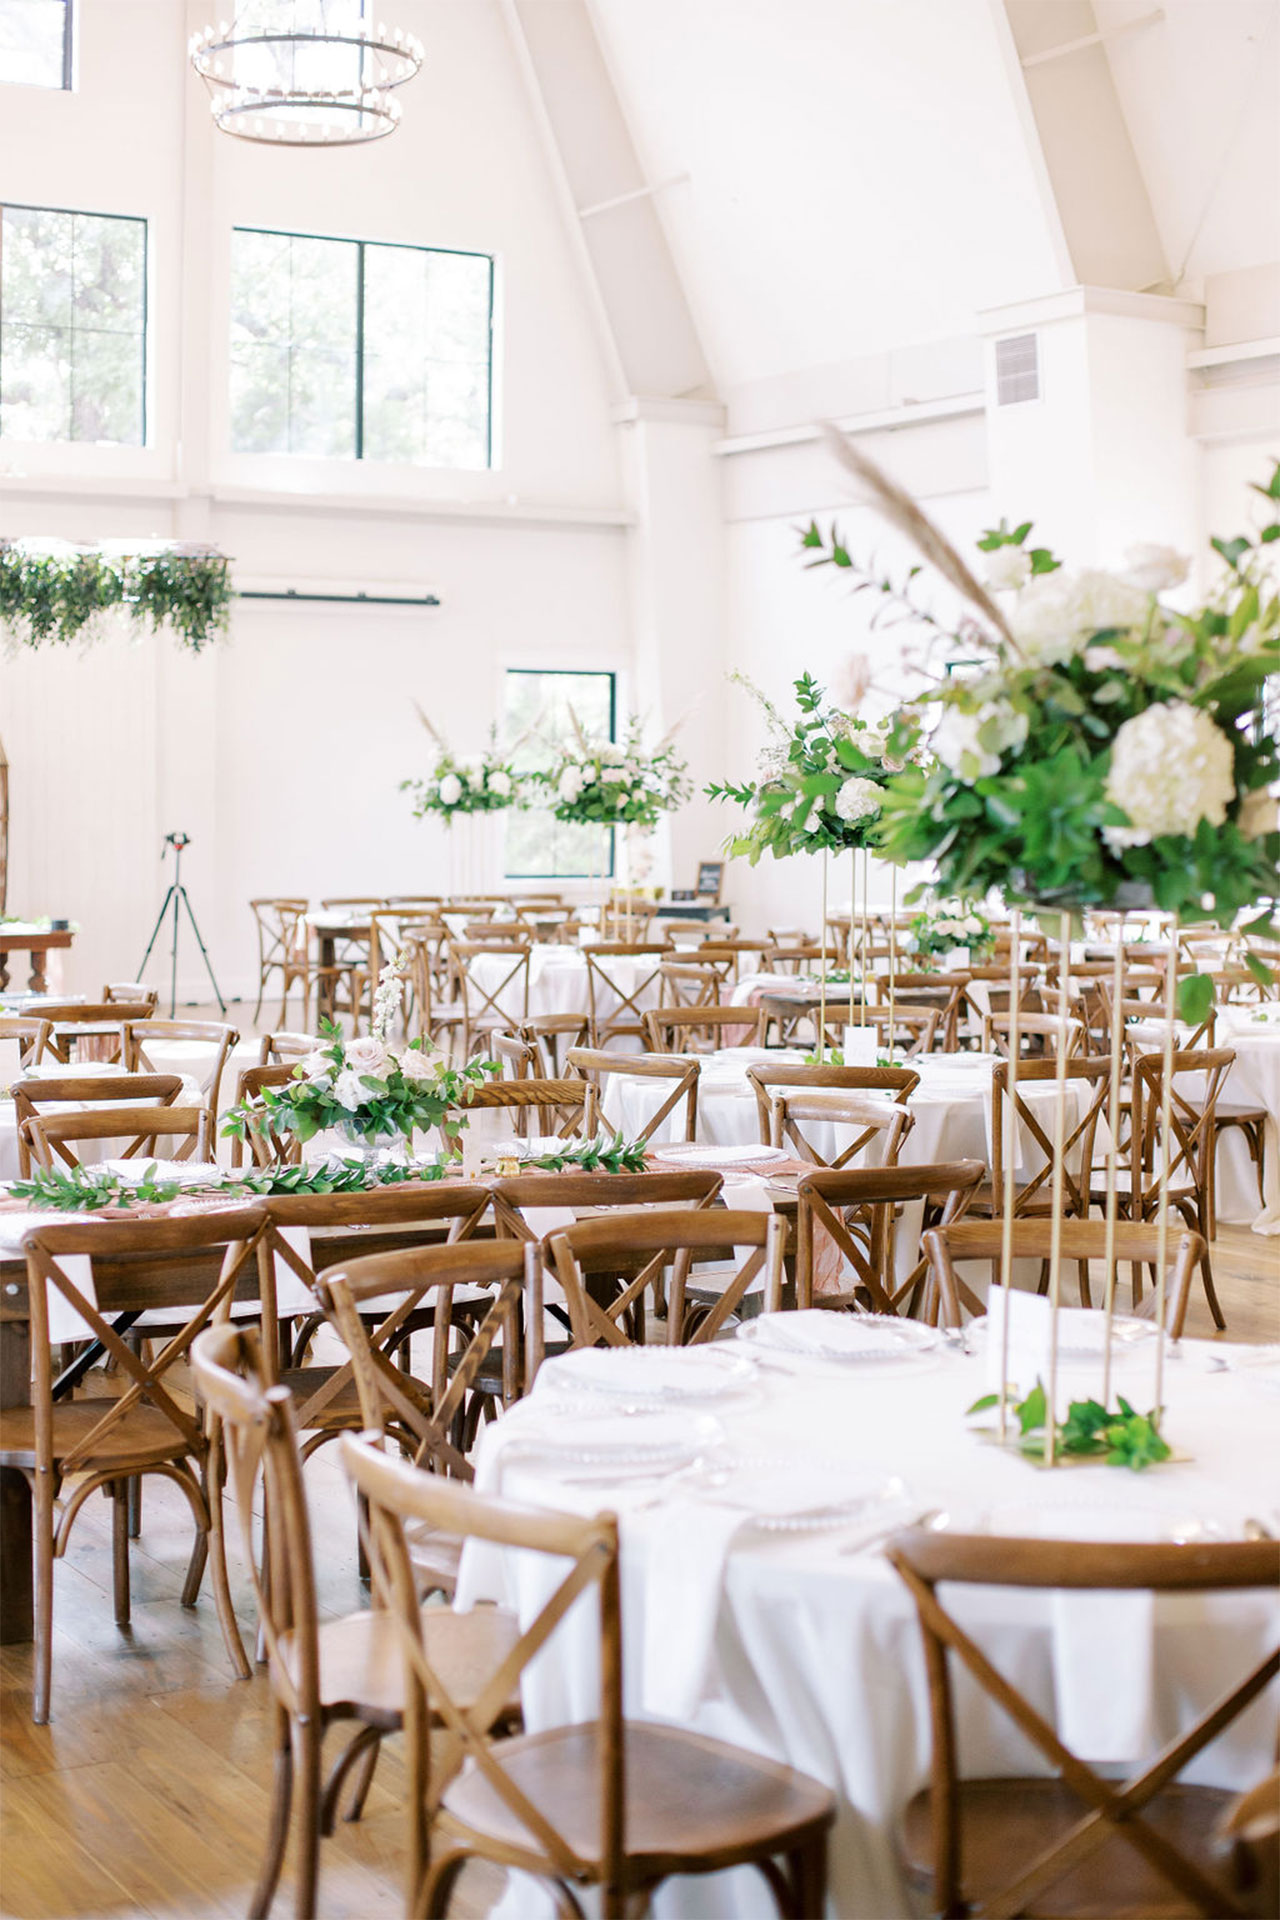 Beautiful indoor reception space for a wedding with plenty of seating and natural light.